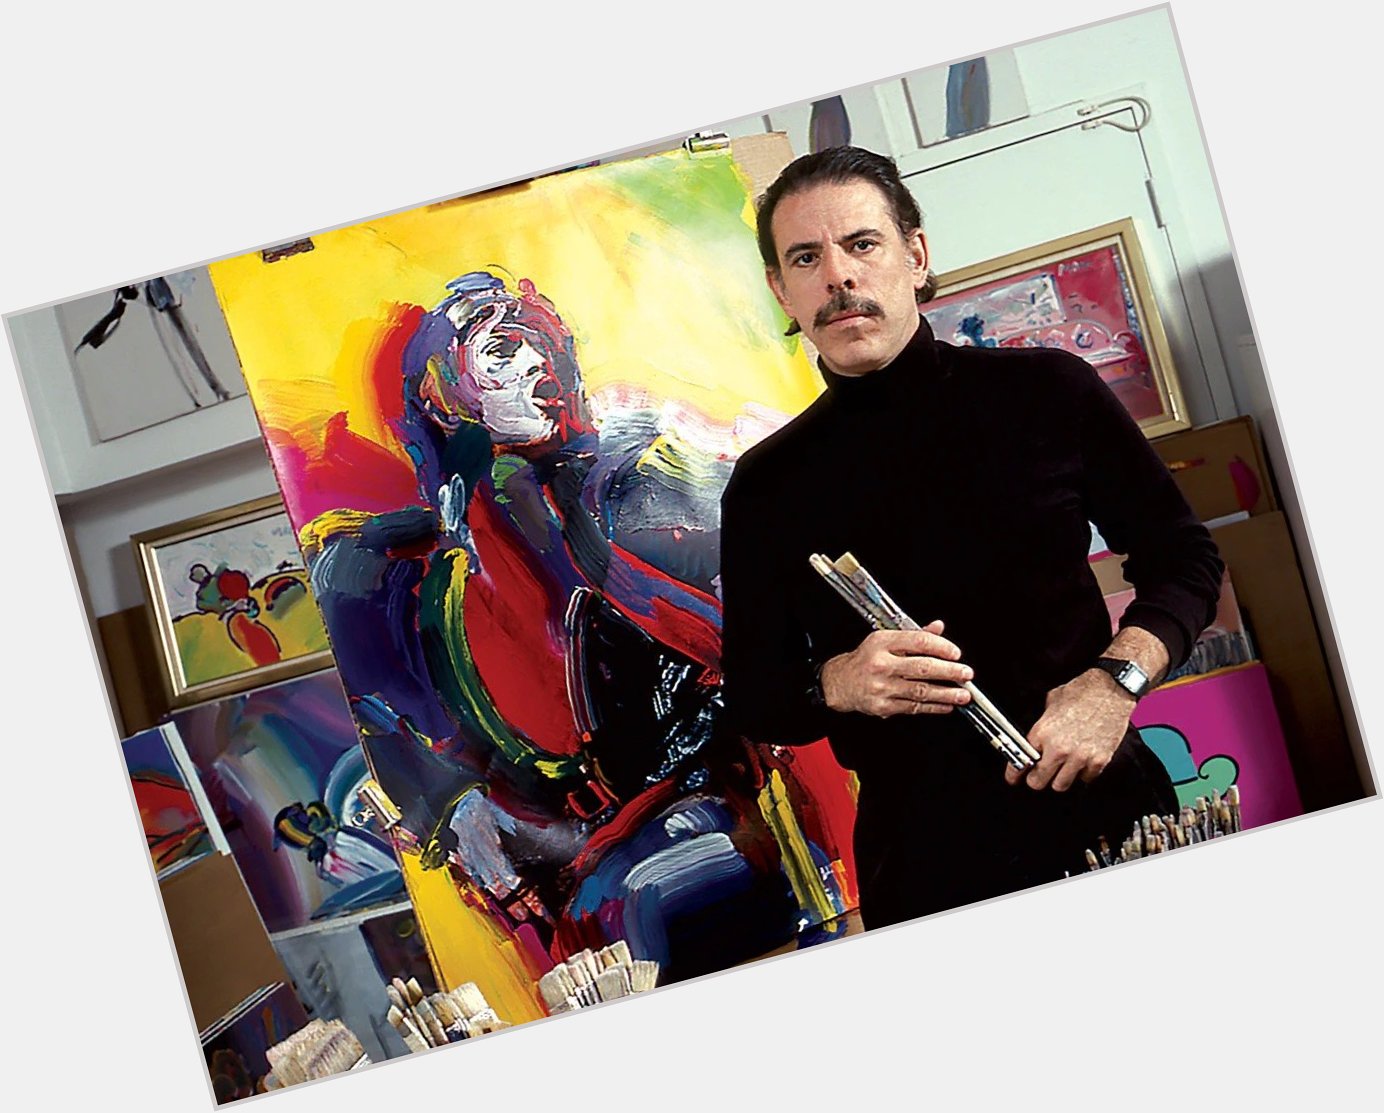 Wishing a Happy 84th Birthday to Peter Max.   